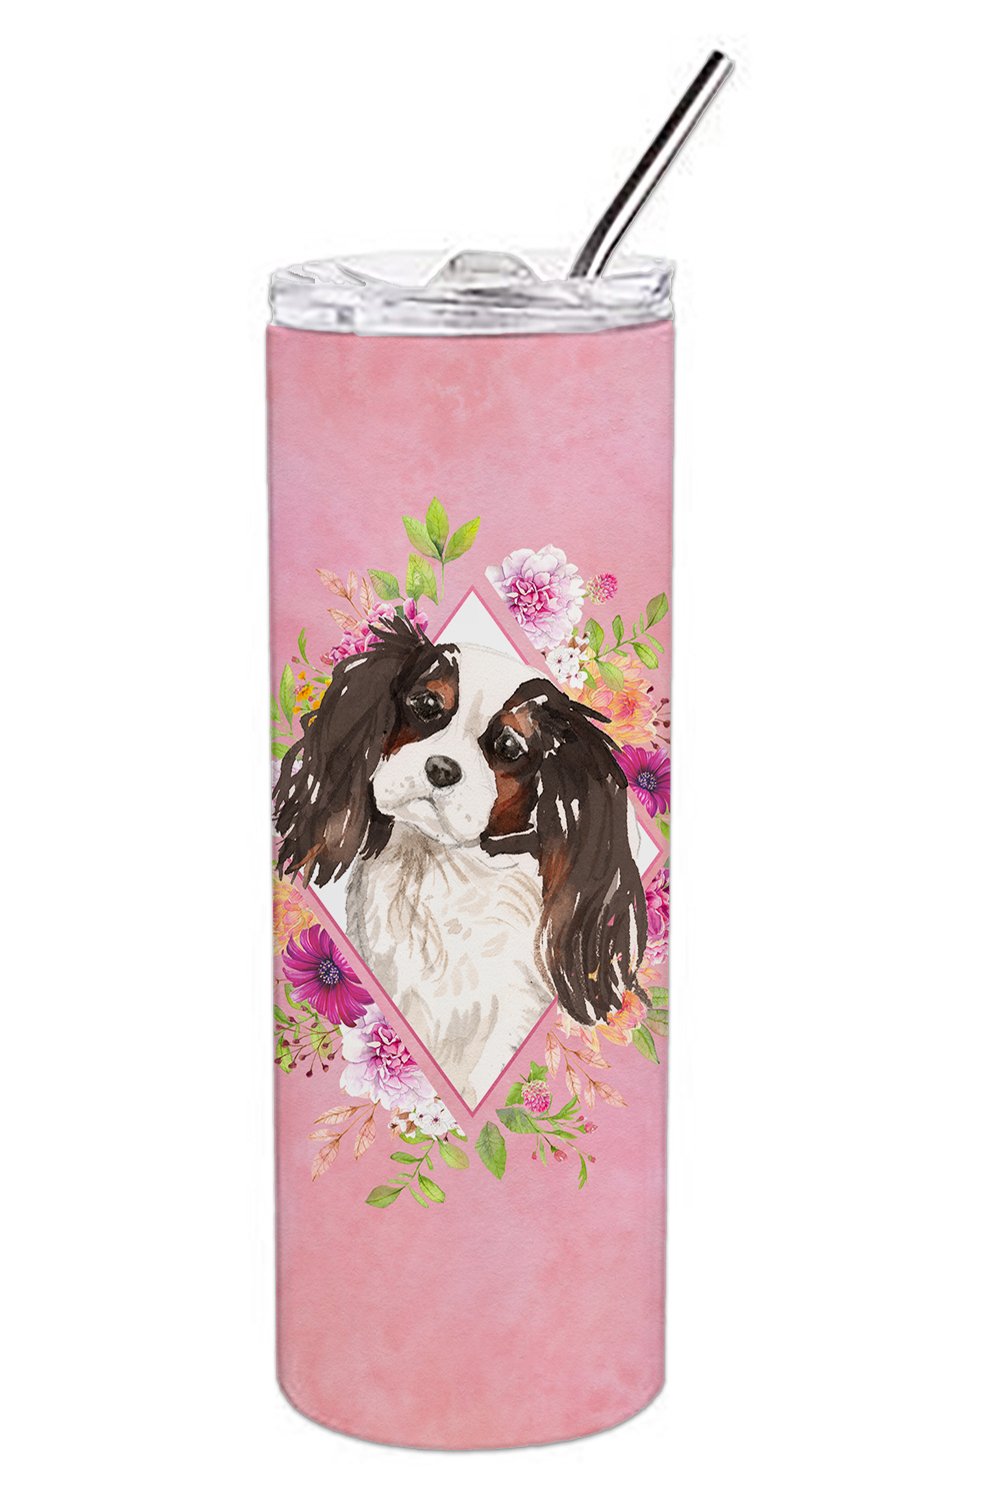 Tricolor Cavalier Spaniel Pink Flowers Double Walled Stainless Steel 20 oz Skinny Tumbler CK4206TBL20 by Caroline's Treasures